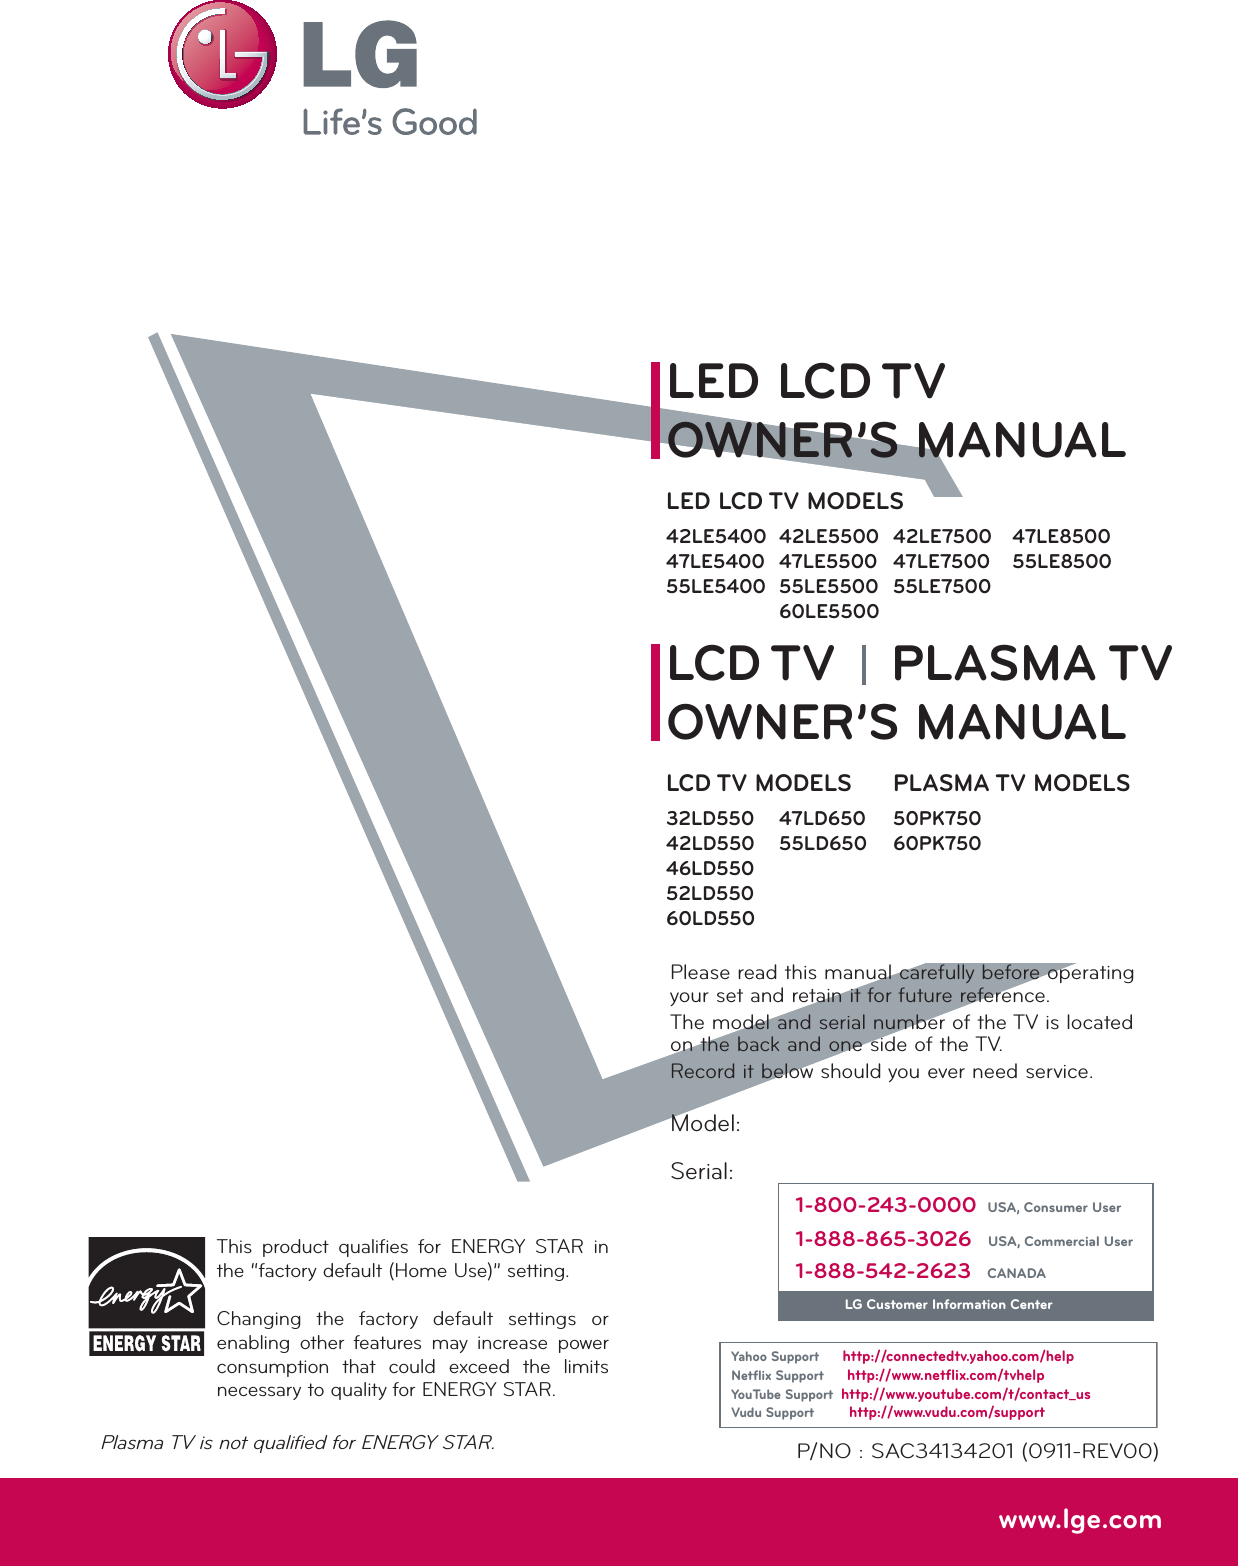 Please read this manual carefully before operating your set and retain it for future reference.The model and serial number of the TV is located on the back and one side of the TV. Record it below should you ever need service.P/NO : SAC34134201 (0911-REV00)www.lge.comThis product qualifies for ENERGY STAR in the “factory default (Home Use)” setting.Changing the factory default settings or enabling other features may increase power consumption that could exceed the limits necessary to quality for ENERGY STAR.Model:Serial:1-800-243-0000USA, Consumer User1-888-865-3026USA, Commercial User1-888-542-2623CANADALG Customer Information CenterYahoo Supporthttp://connectedtv.yahoo.com/helpNetﬂix Supporthttp://www.netﬂix.com/tvhelpYouTube Supporthttp://www.youtube.com/t/contact_usVudu Supporthttp://www.vudu.com/supportLCD TVLED LCD TVPLASMA TVOWNER’S MANUALOWNER’S MANUALLCD TV MODELS32LD55042LD55046LD55052LD55060LD550LED LCD TV MODELS42LE540047LE540055LE540042LE550047LE550055LE550060LE550047LD65055LD65047LE850055LE8500PLASMA TV MODELS50PK75060PK75042LE750047LE750055LE7500Plasma TV is not qualified for ENERGY STAR.